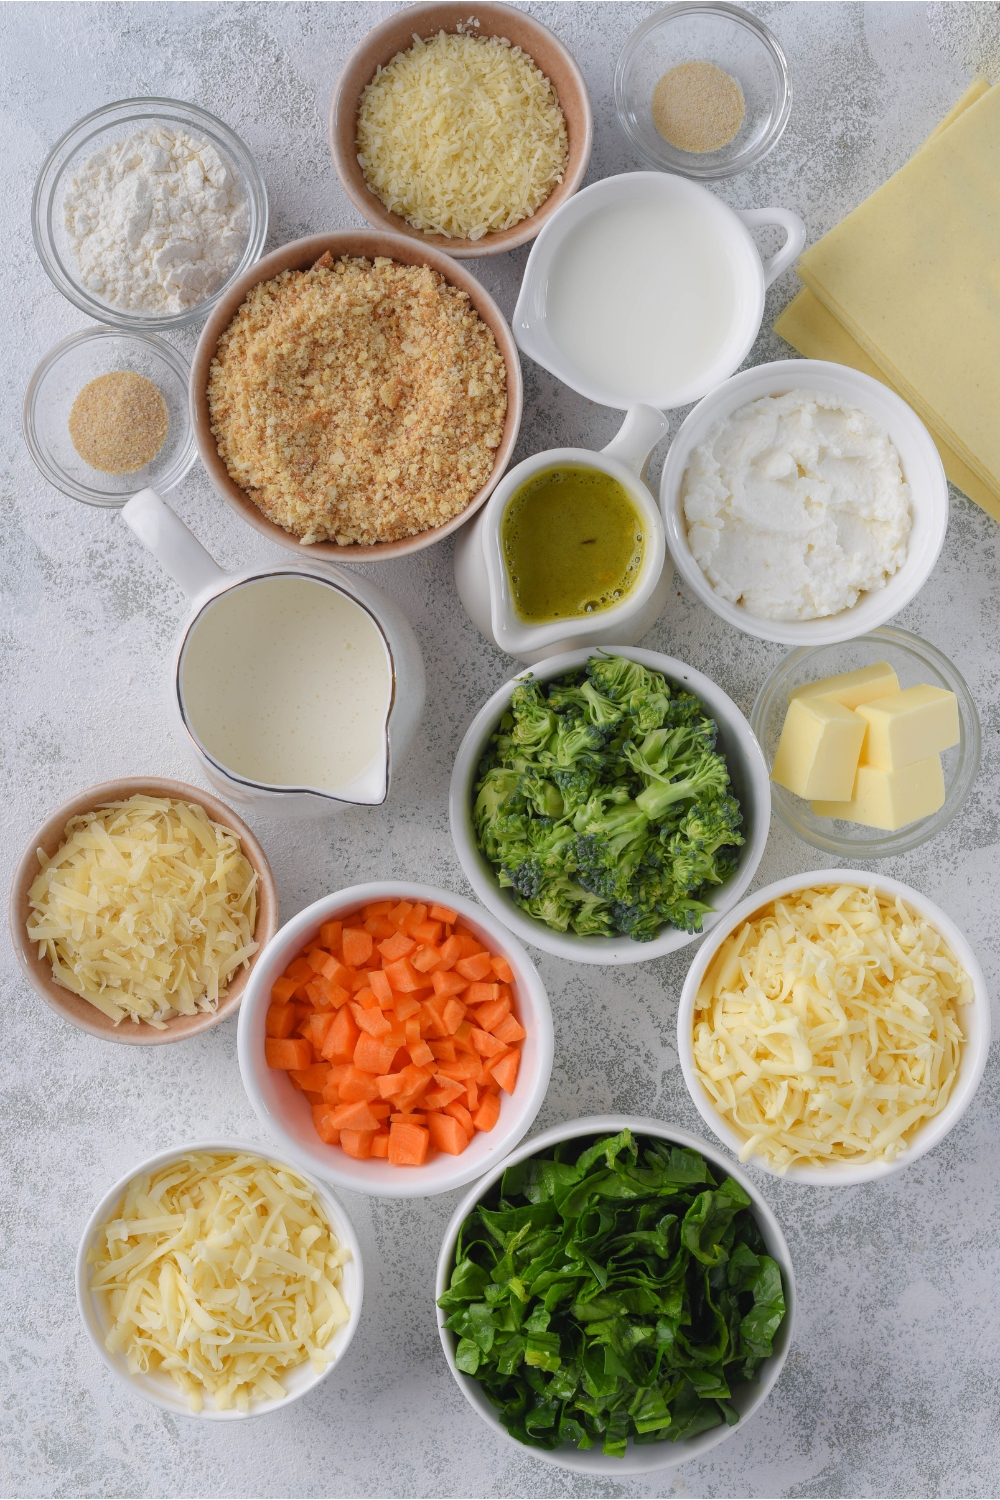 Overhead view of an assortment of ingredients including bowls of cream, ricotta cheese, cracker crumbs, diced broccoli, carrots, fresh spinach, shredded cheeses, spices, and a stack of lasagna noodles.